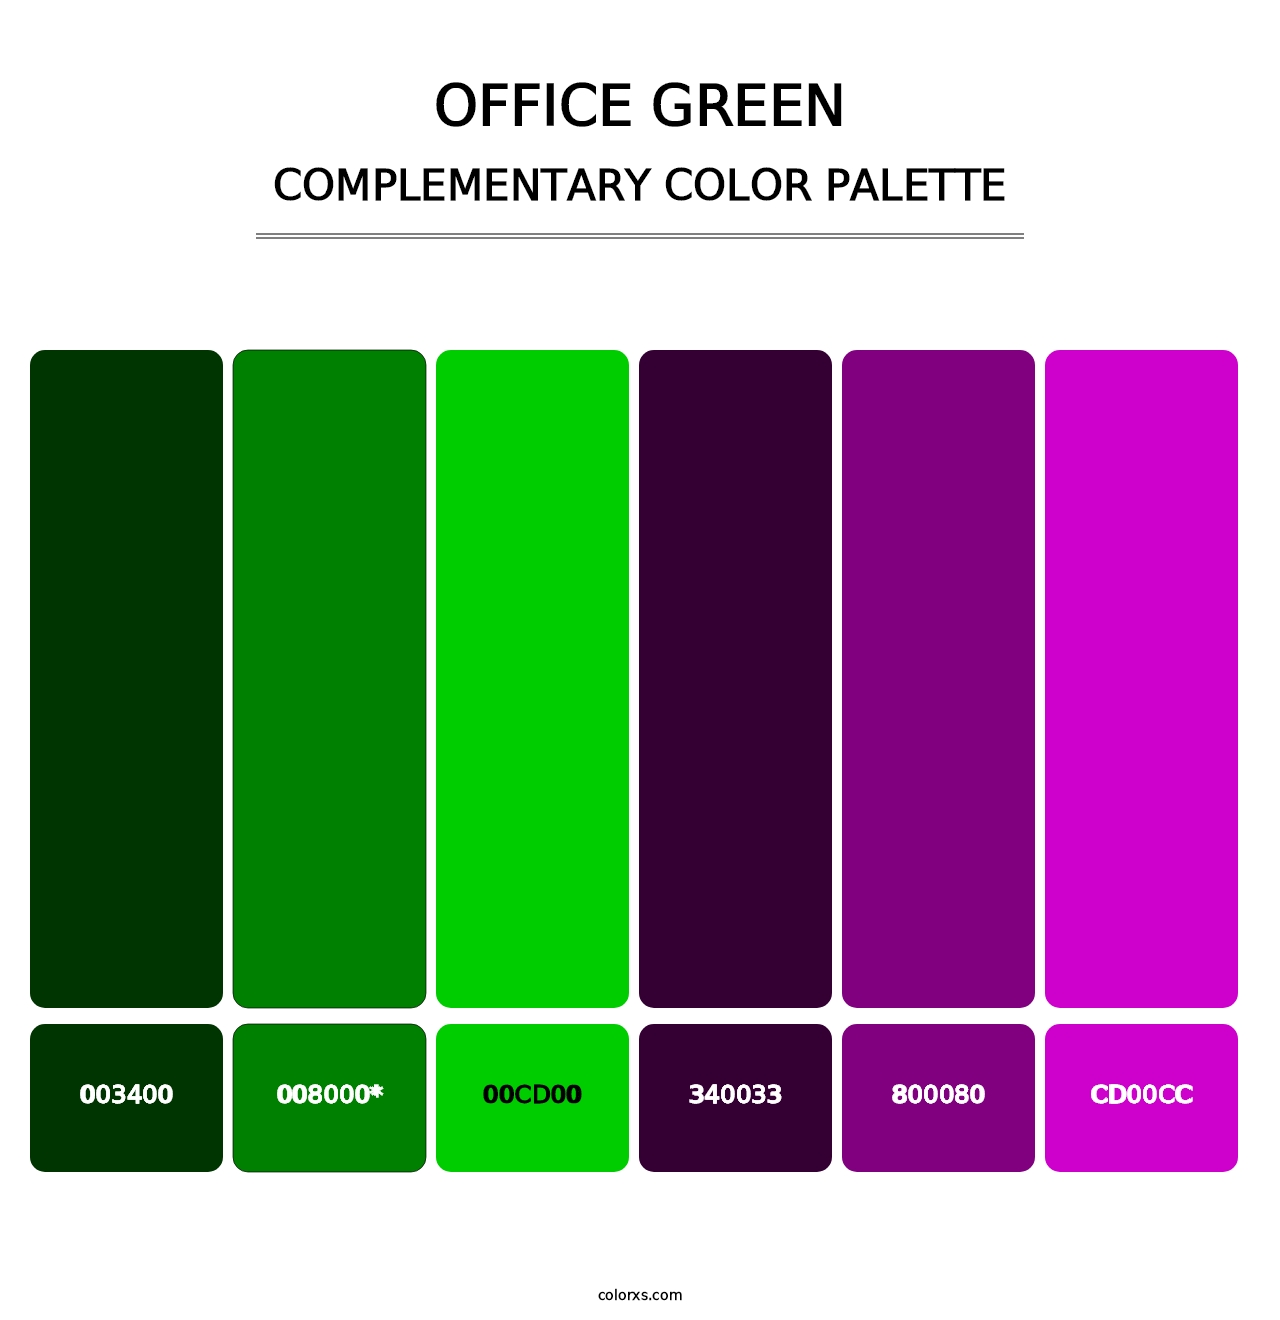 Office Green - Complementary Color Palette